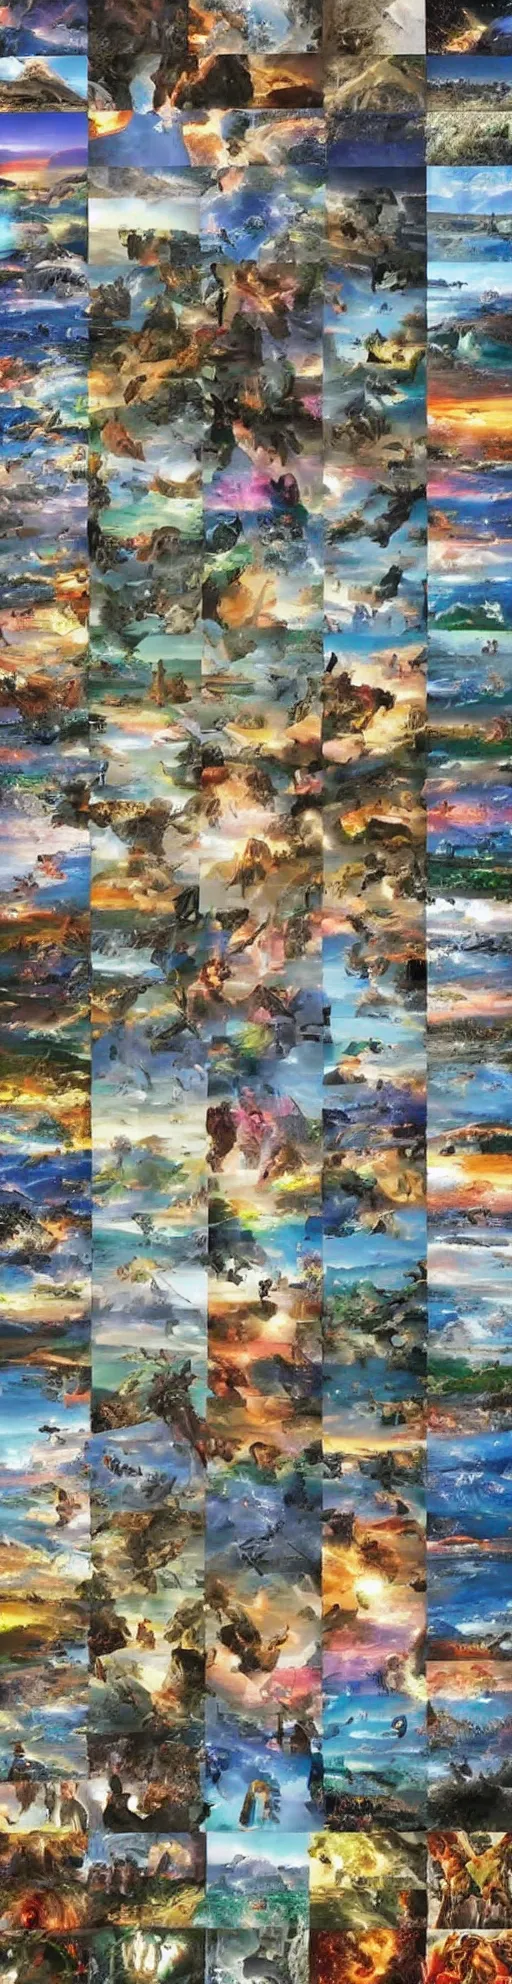 Prompt: grid of 1 6 thumbnails each containing an image of the worlds most beautiful artwork